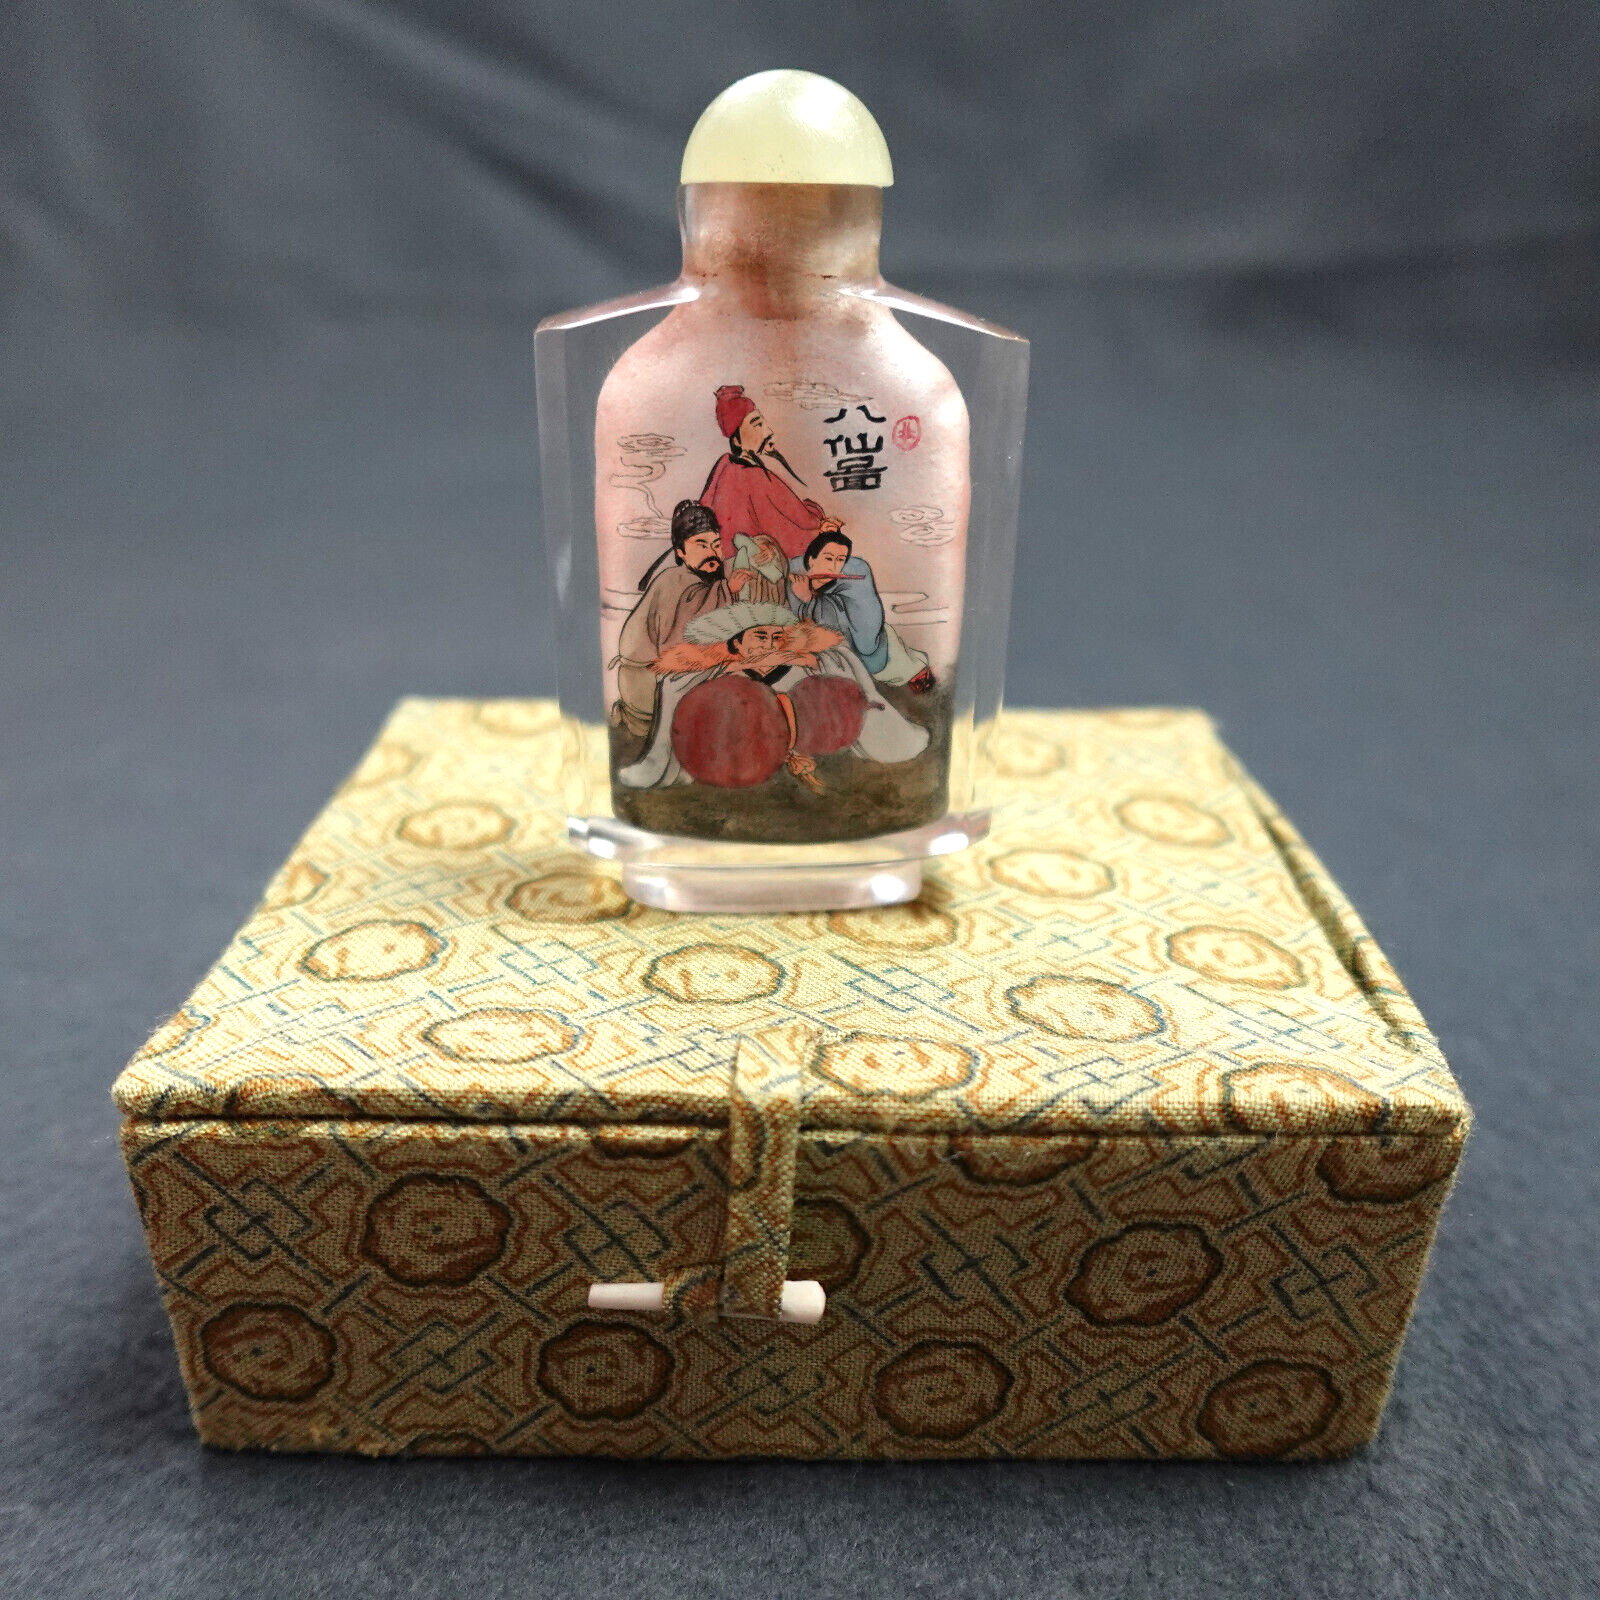 VTG Chinese Inside Painted Lead Crystal Snuff Bottle 8 Men Scholars or Taoists